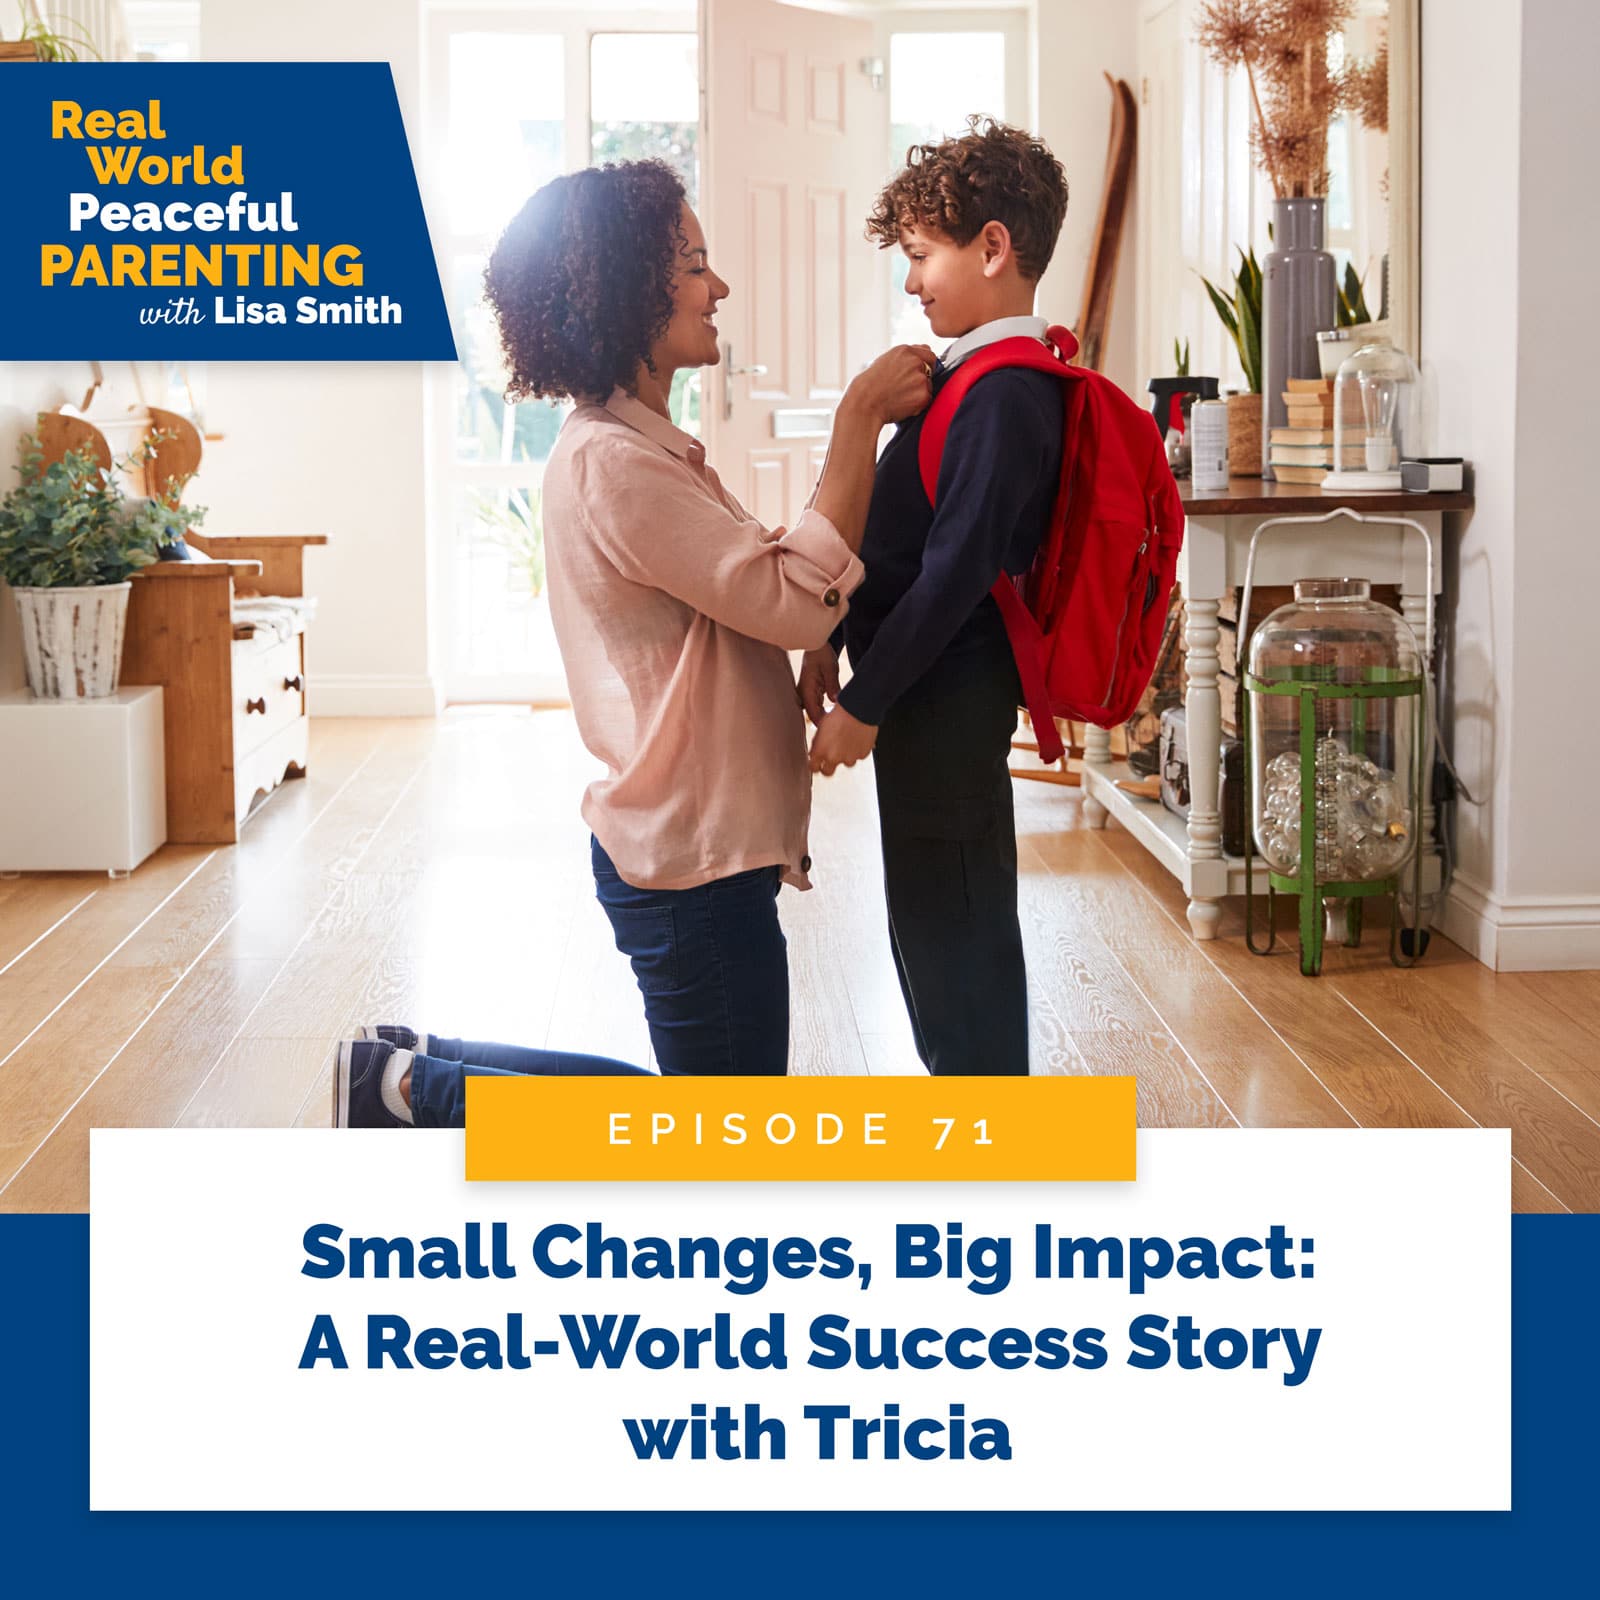 Real World Peaceful Parenting | Small Changes, Big Impact: Success Story Tricia